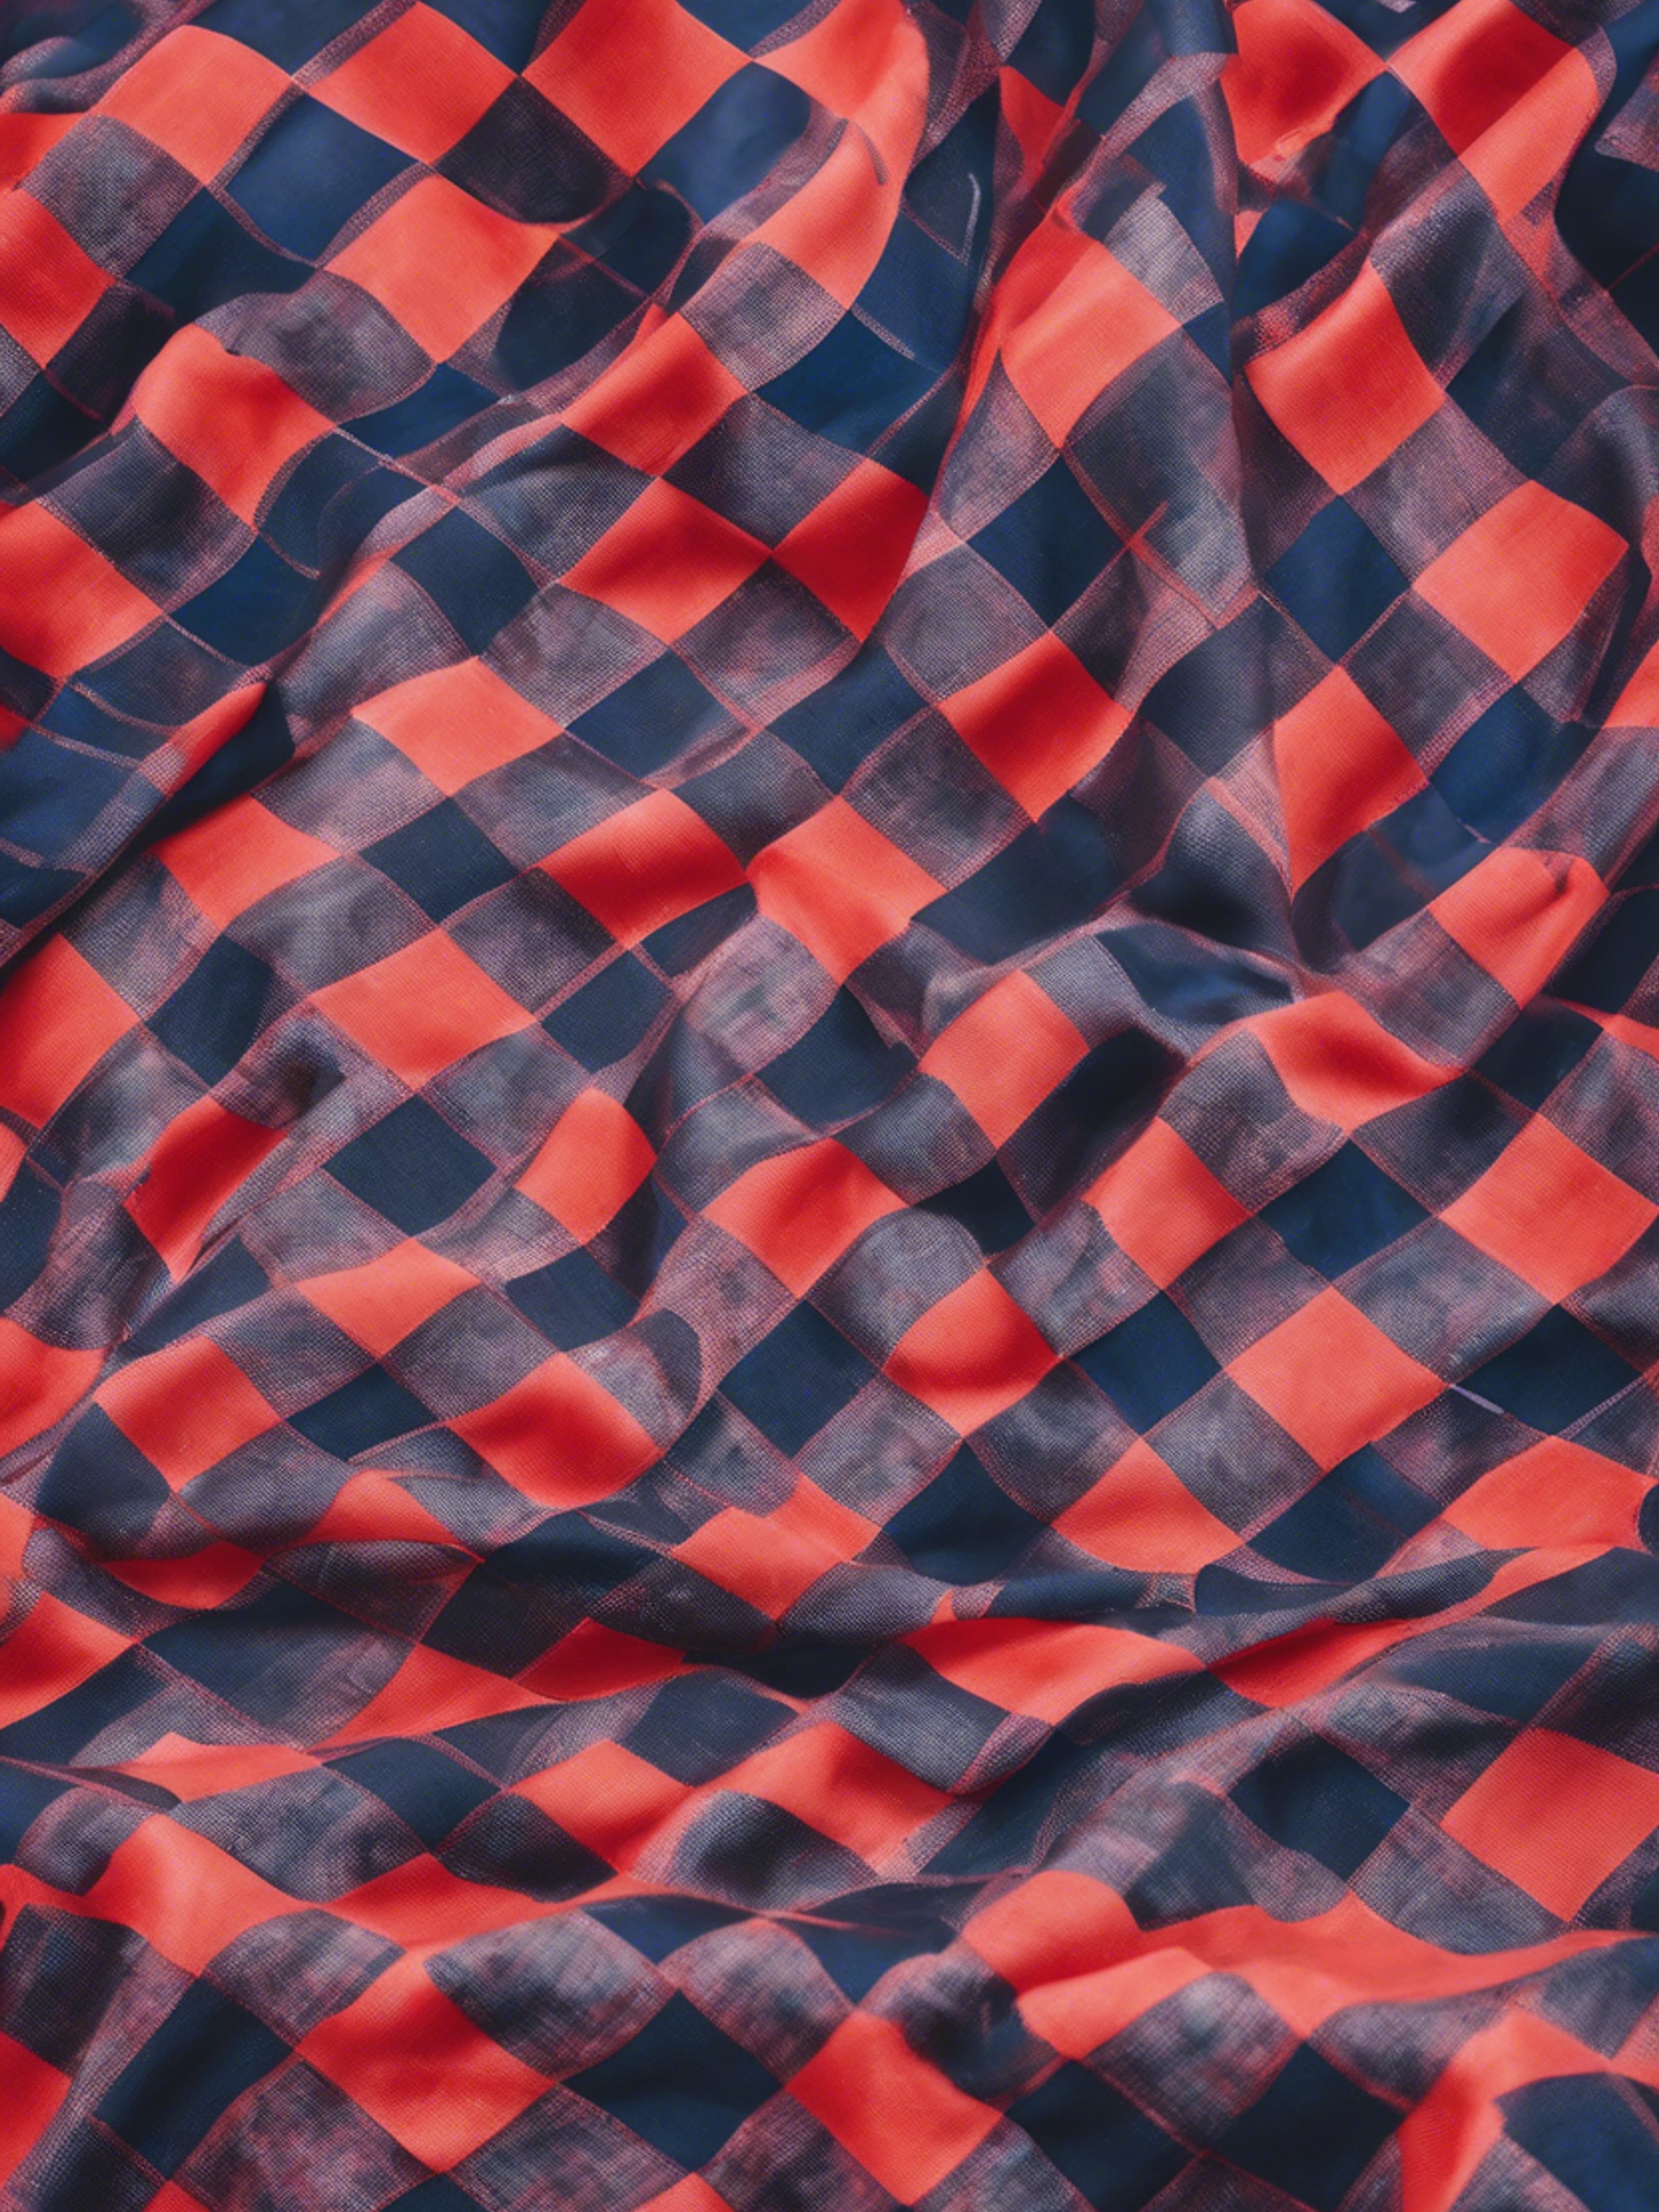 A kitchen tablecloth style checkered pattern in red and navy.壁紙[d4dc811b897e47f5a429]